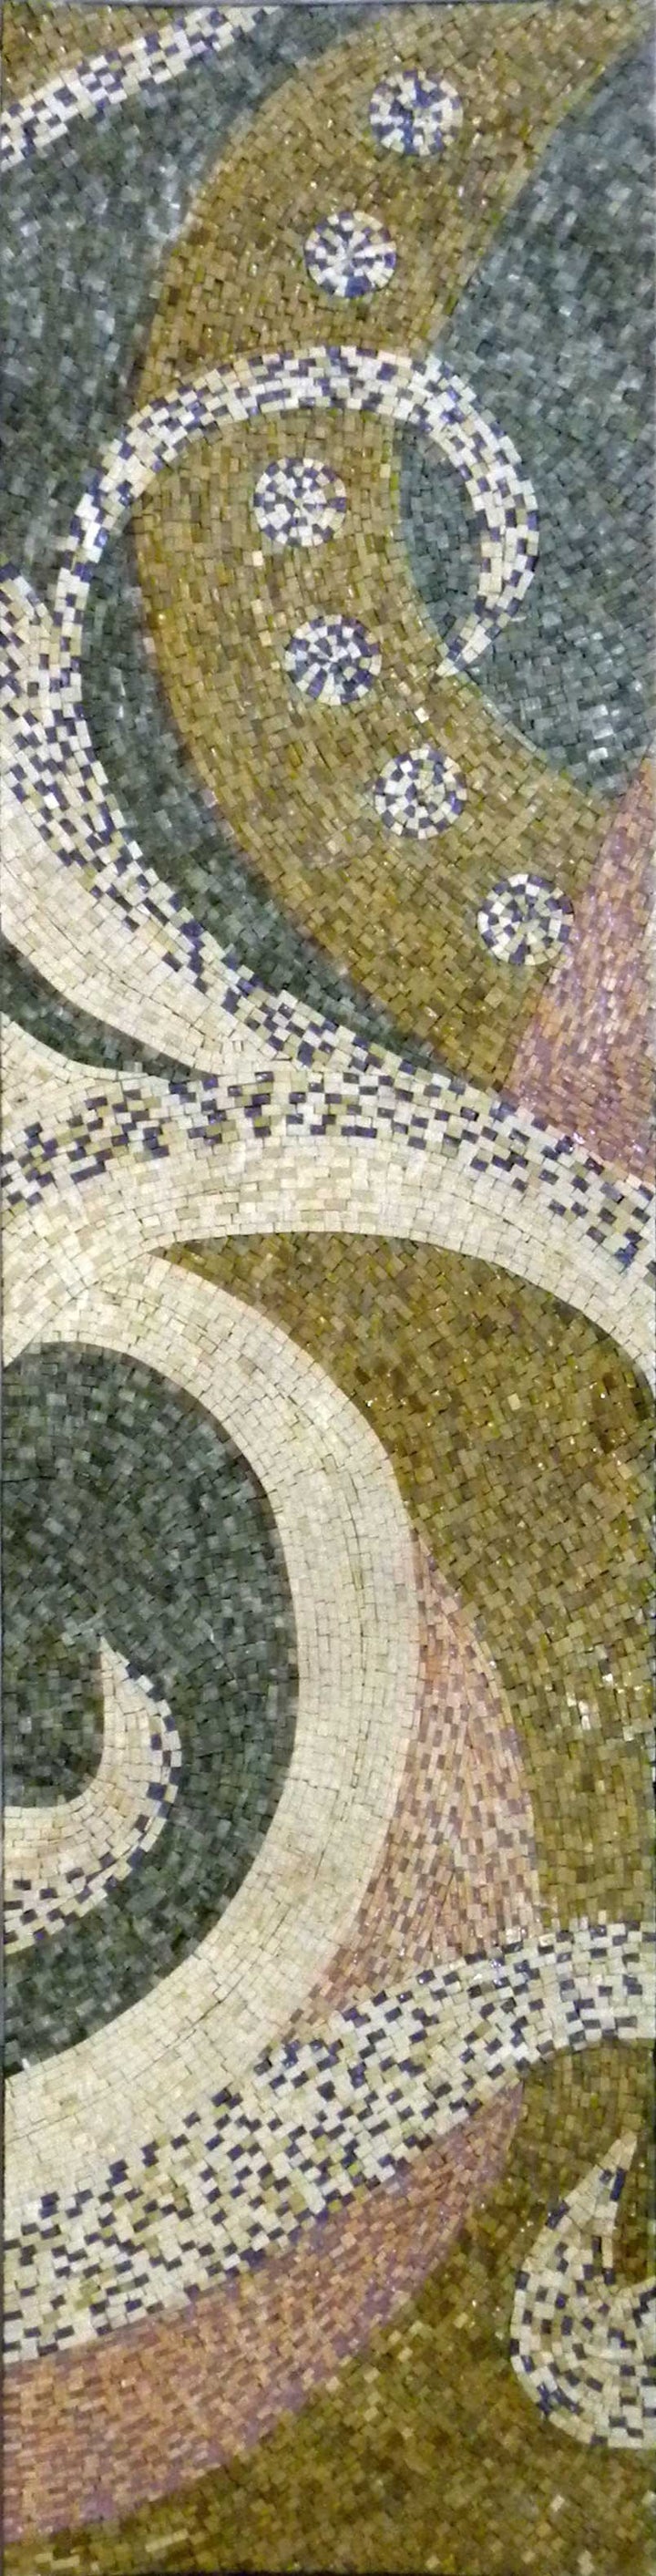 Abstract Mosaic Pattern - Curly Leaves